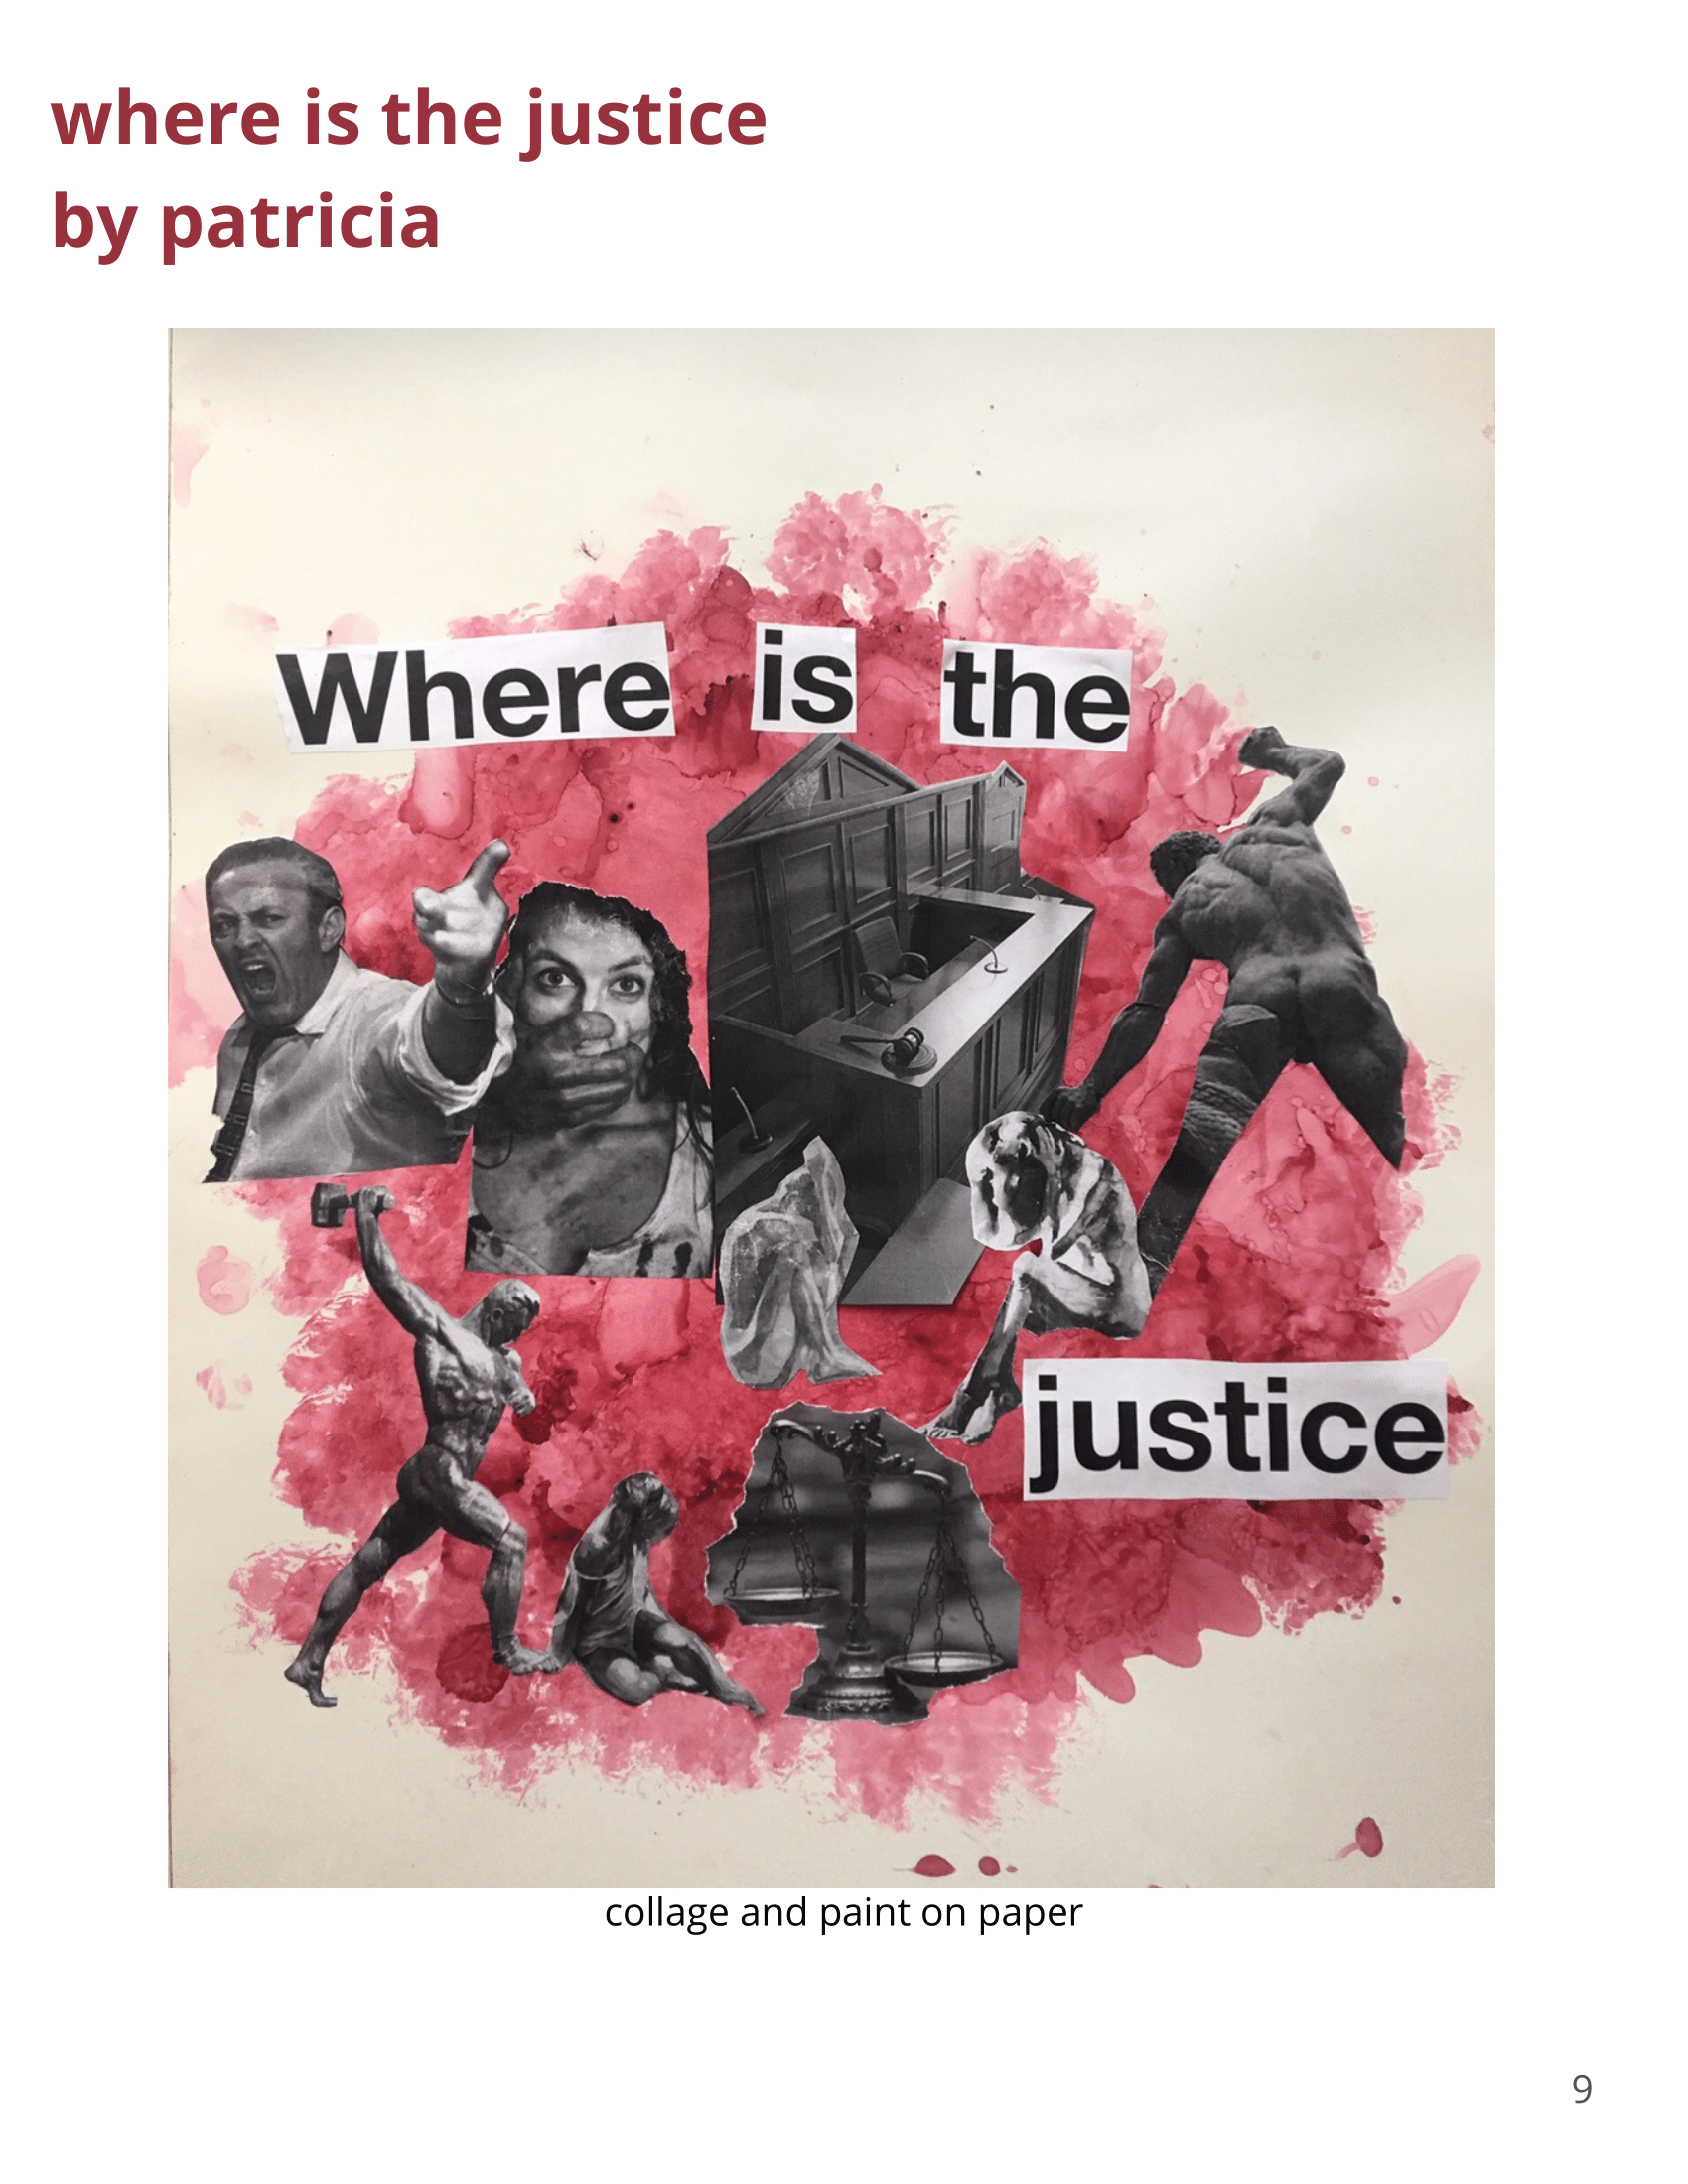 where is the justice - witnessing the power within